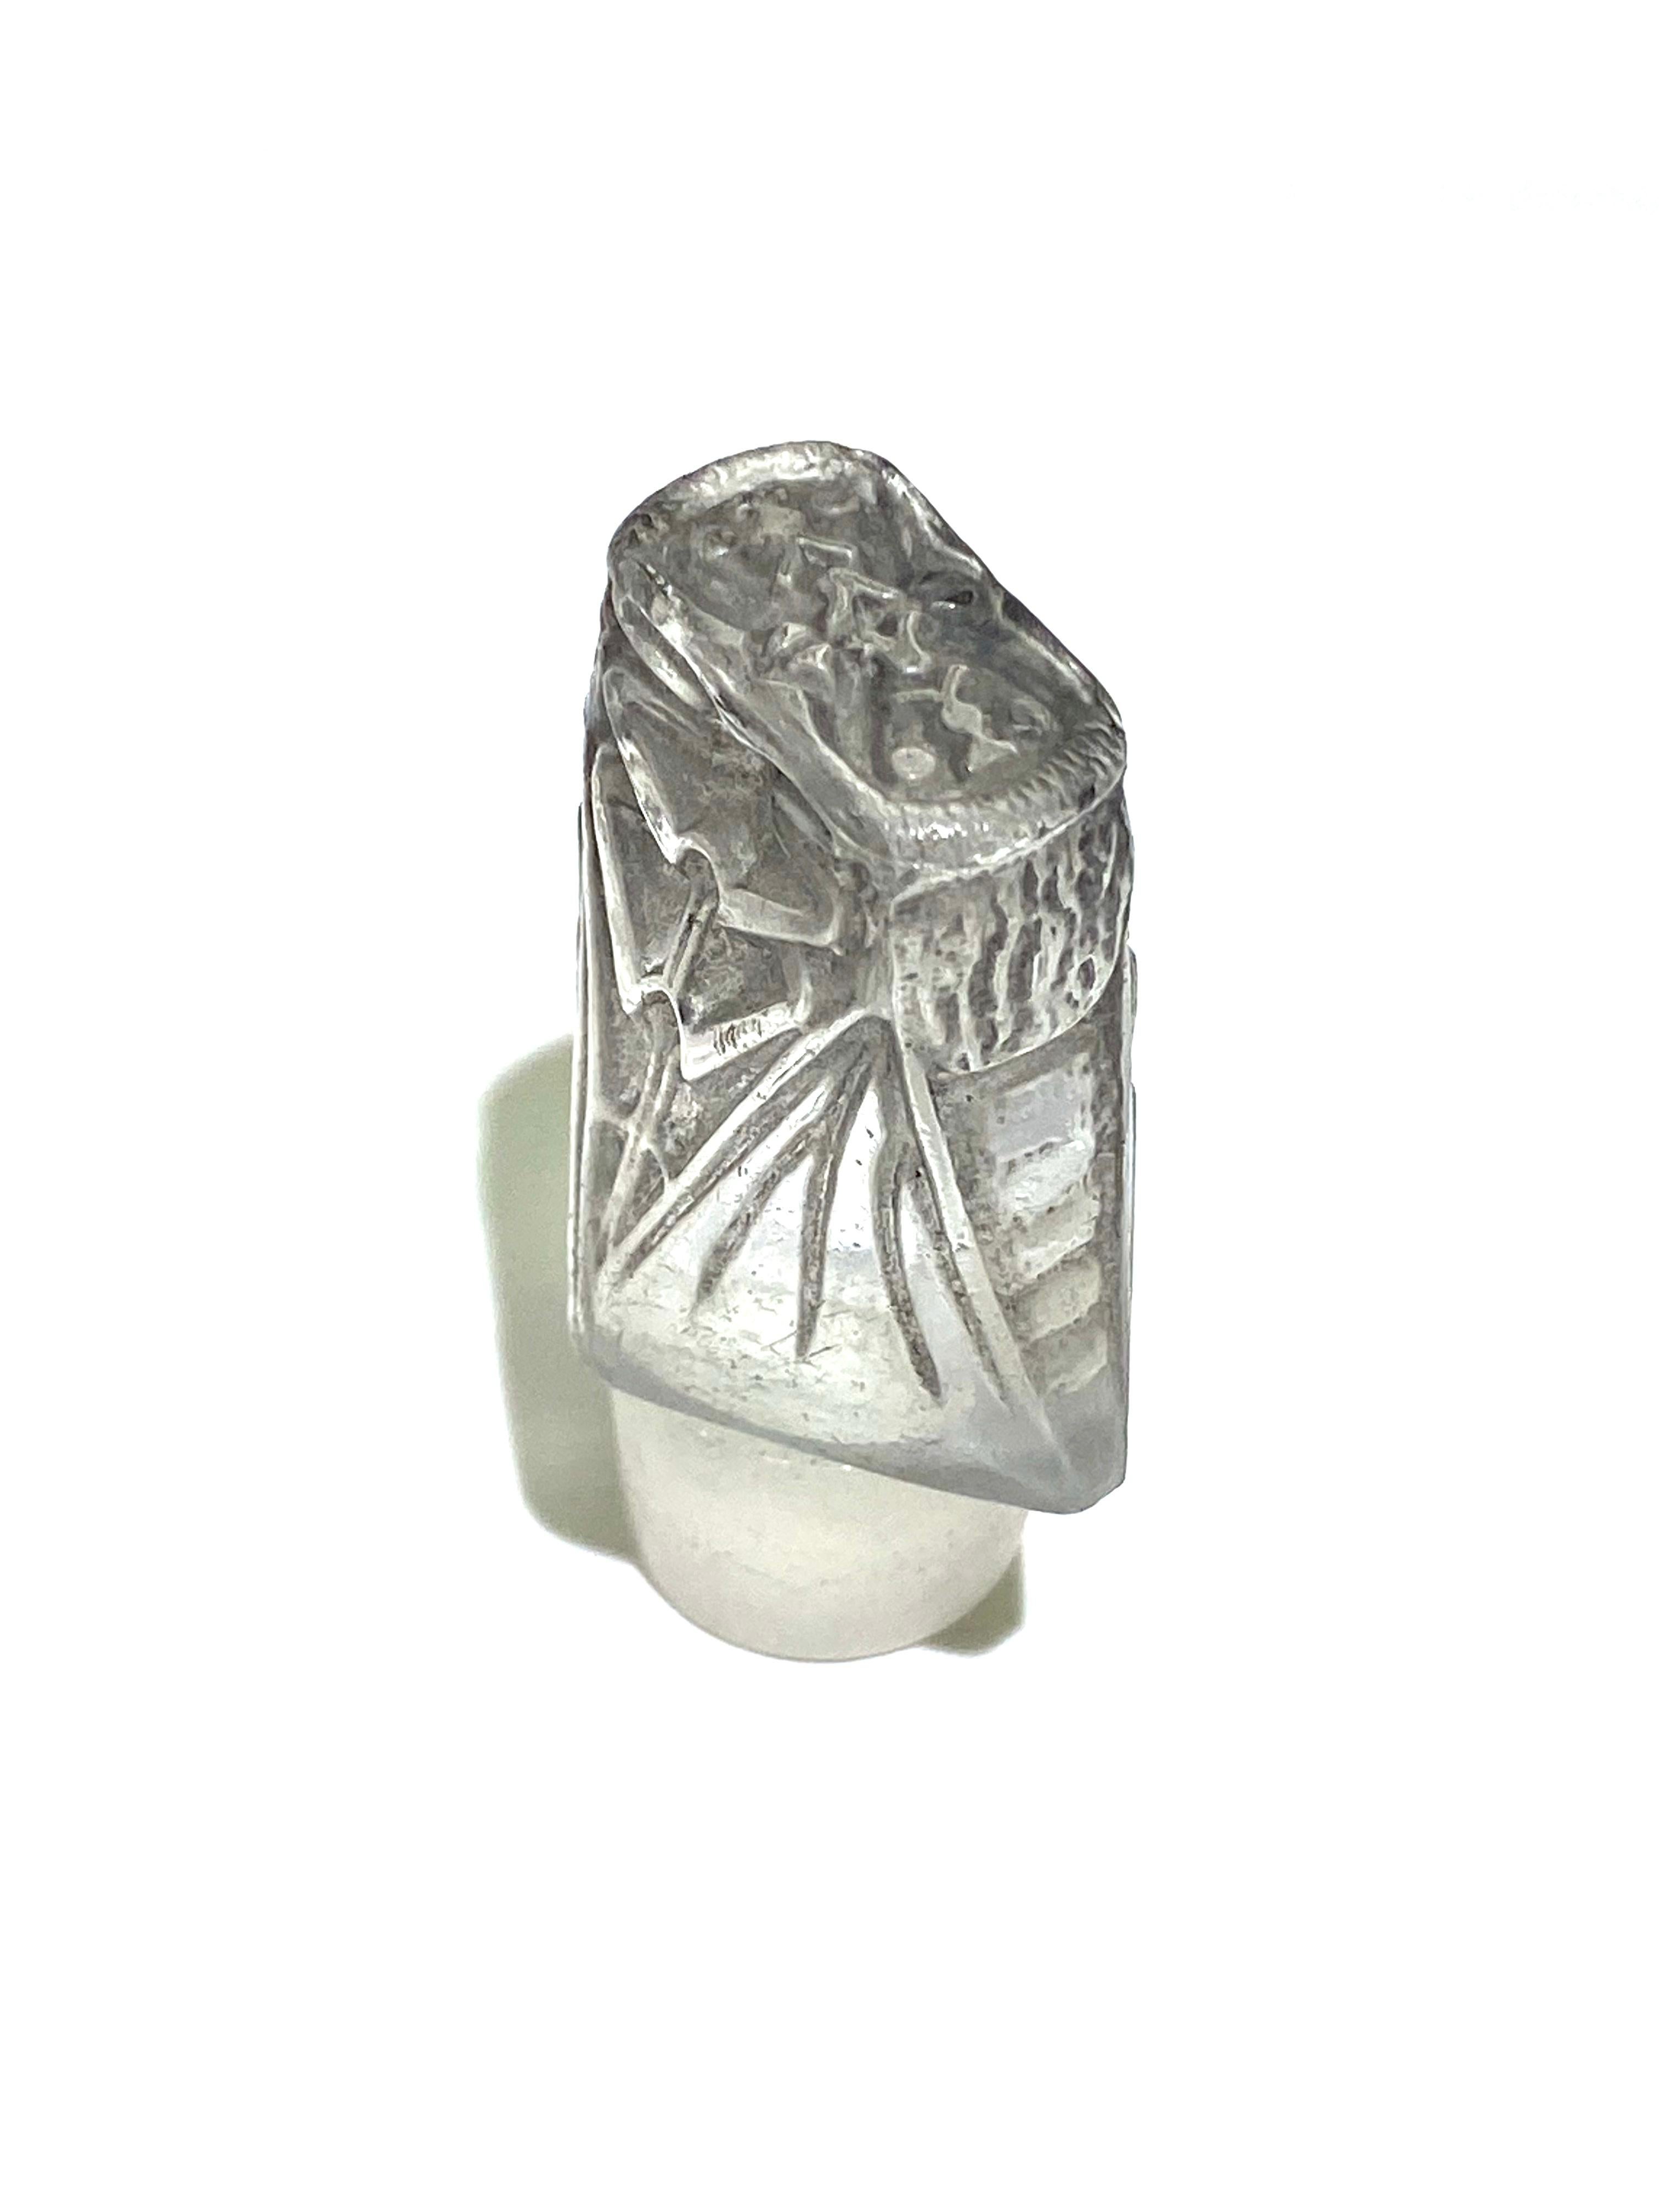 Blown Glass 1911 Rene Lalique L'Effleurt for Coty Perfume Bottle Grey Stained Glass, Cicada